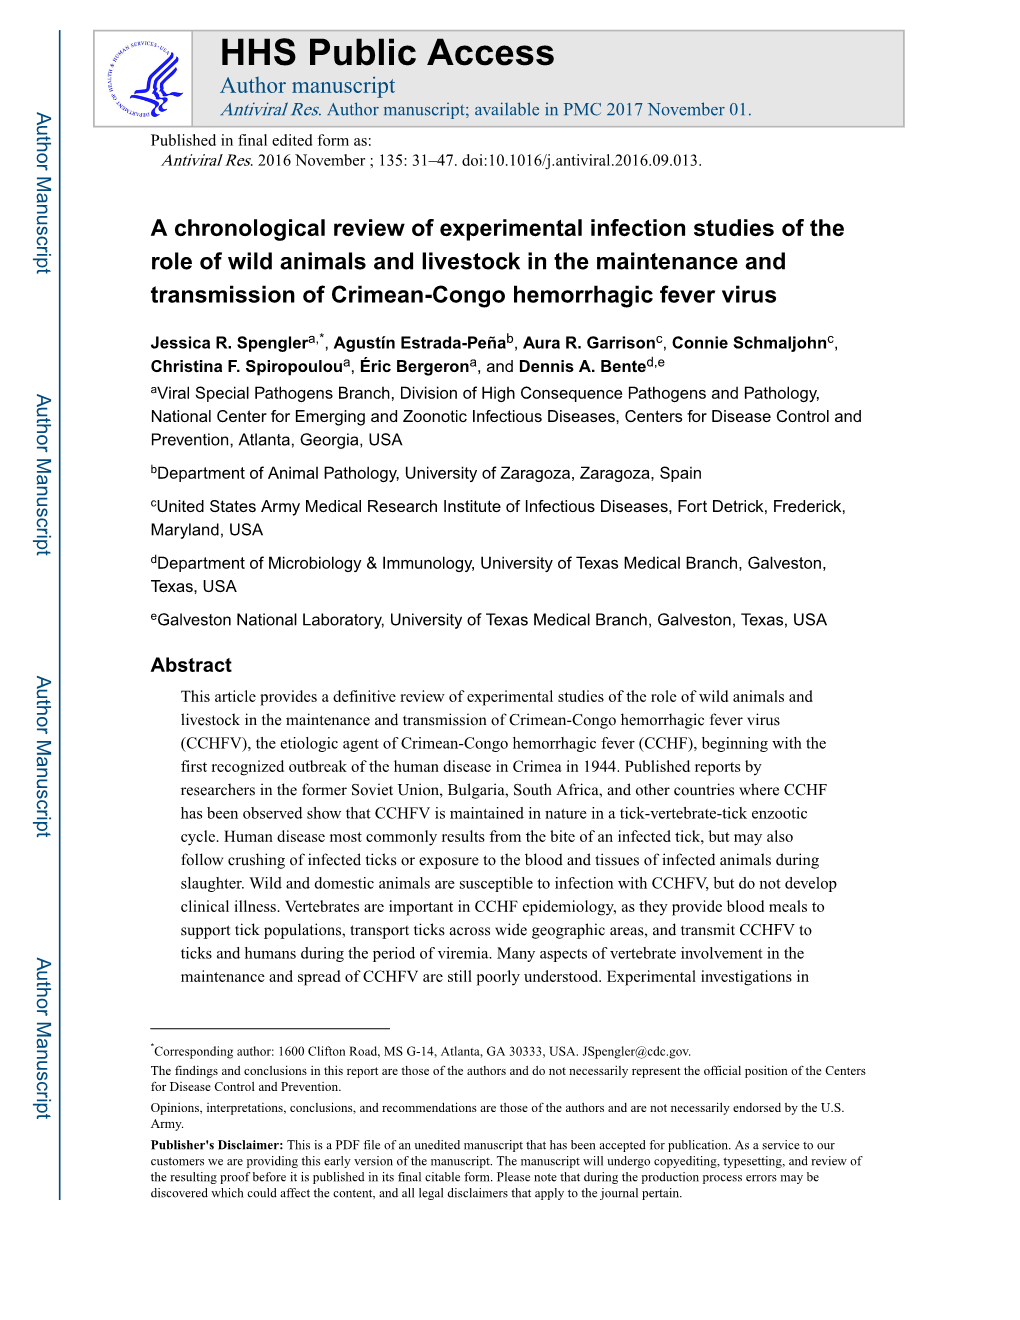 A Chronological Review of Experimental Infection Studies of The